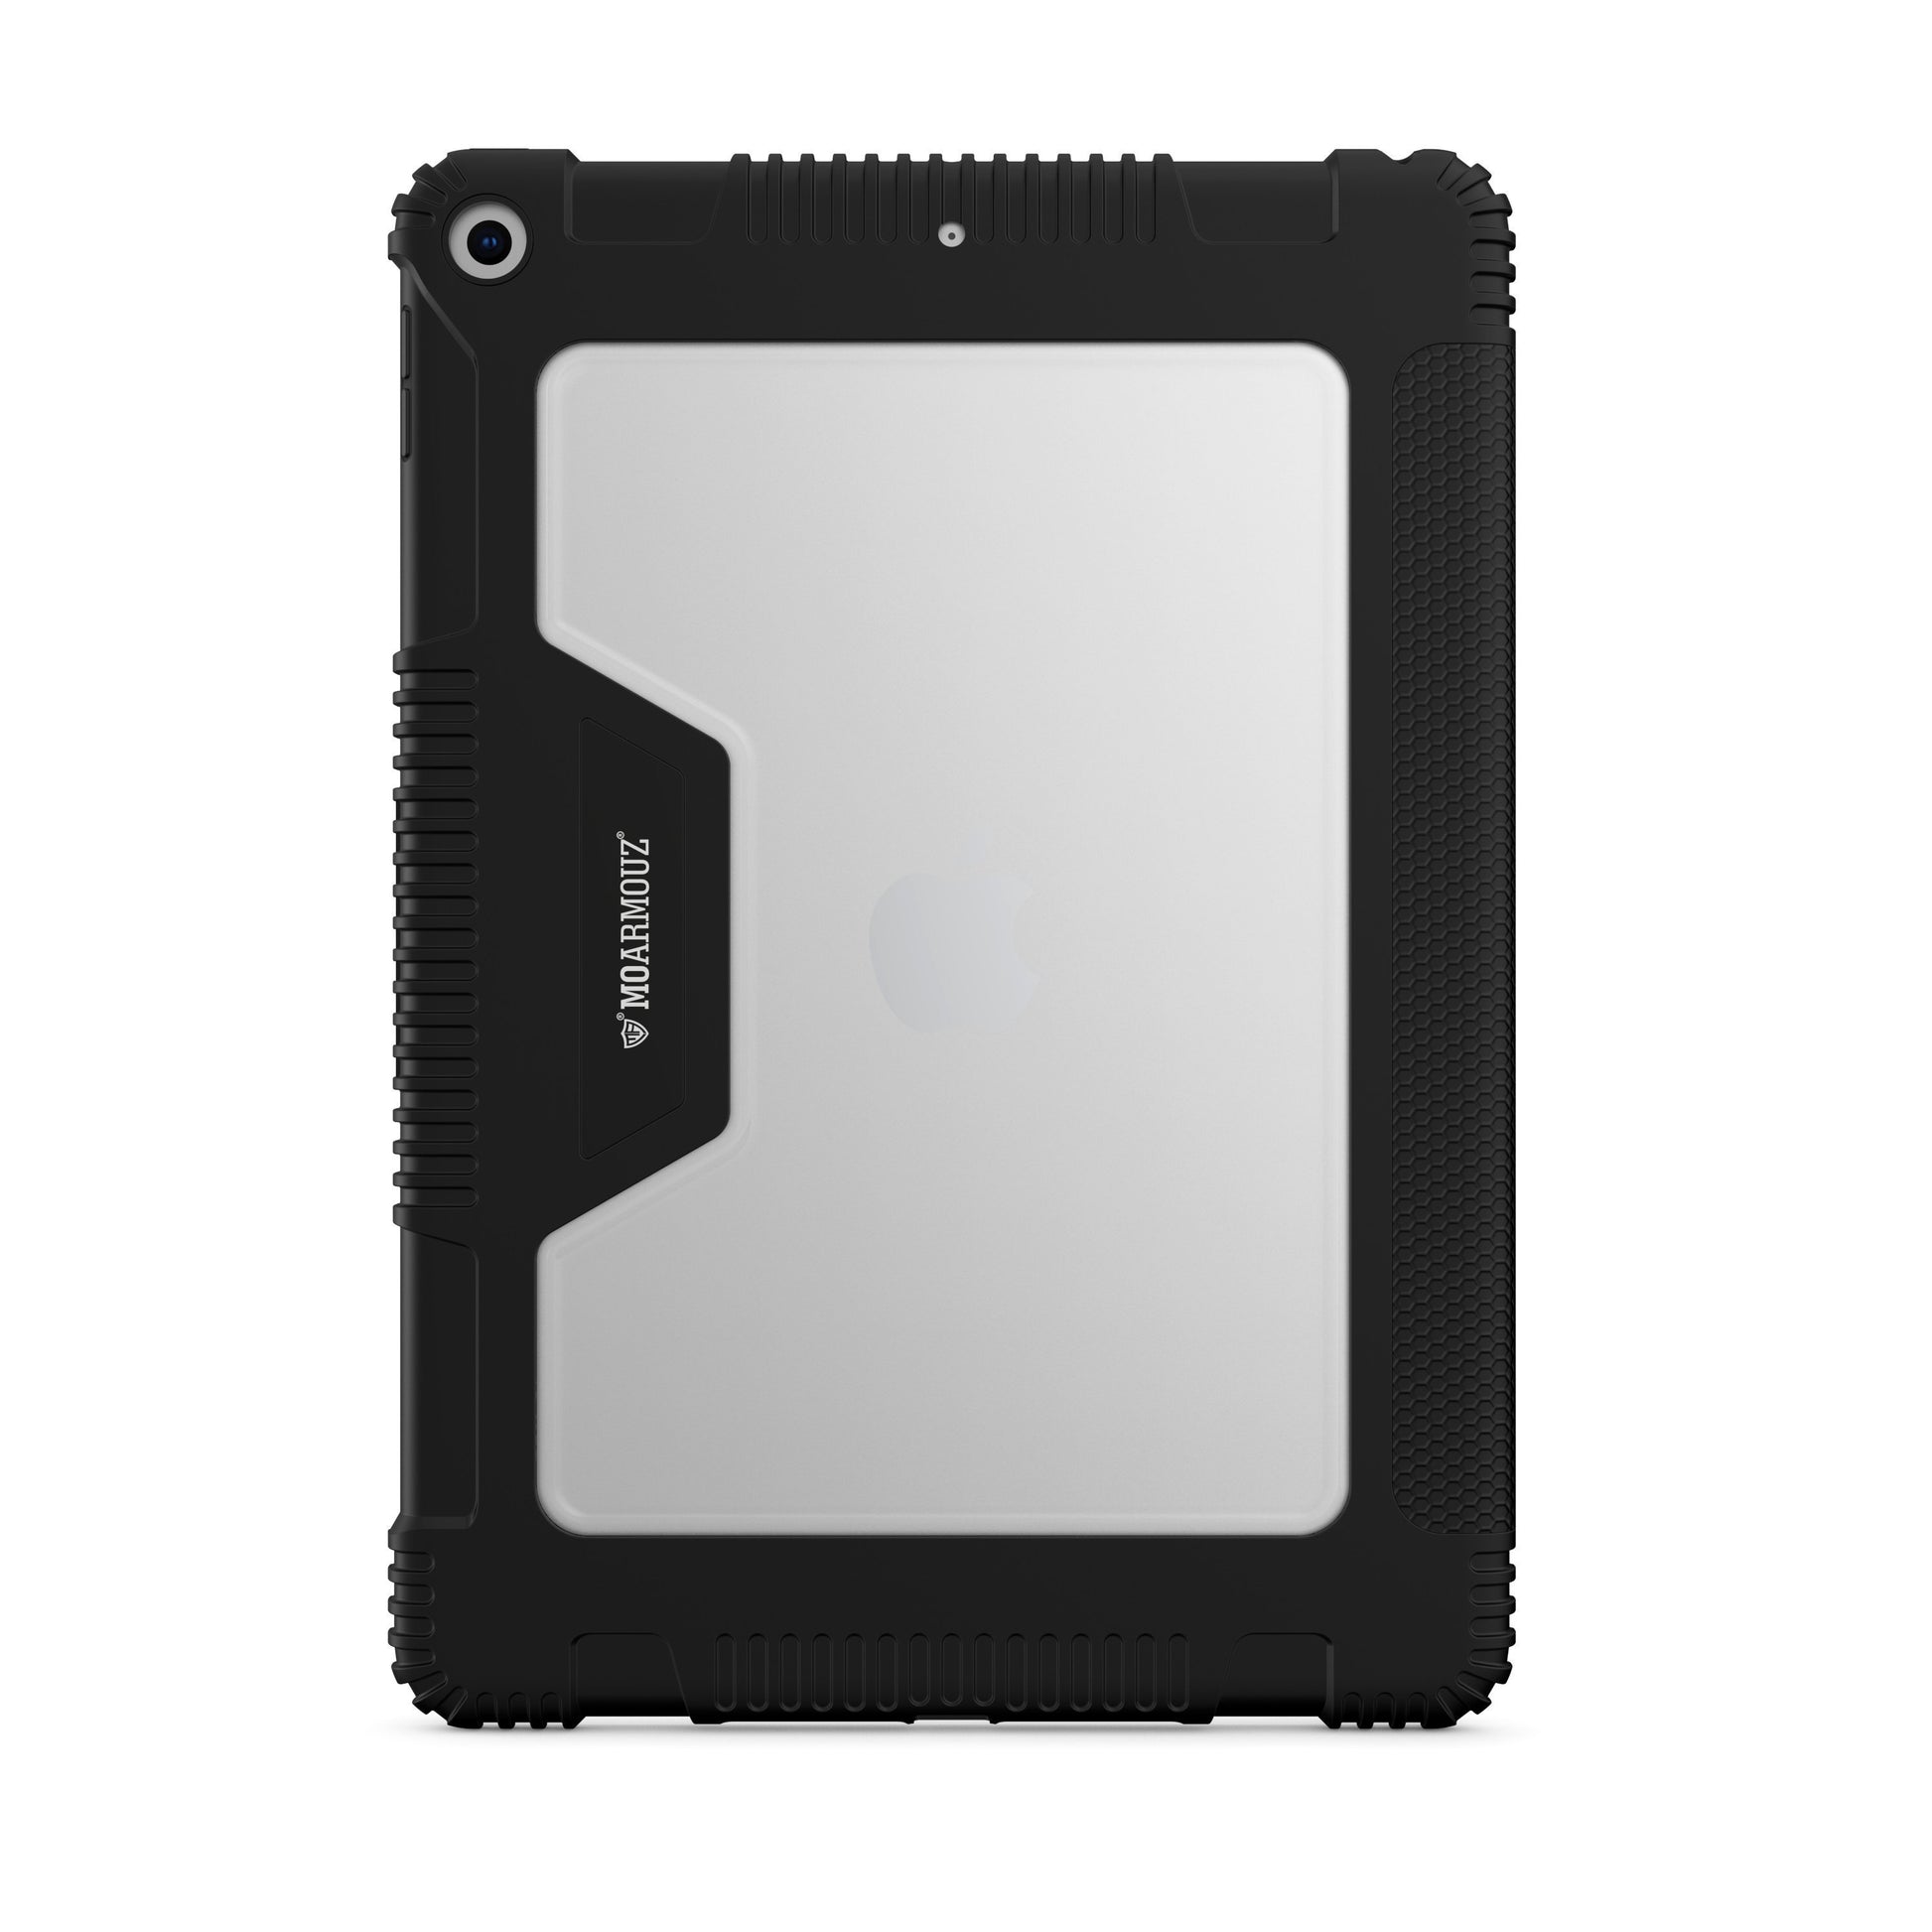 MoArmouz - Rugged Kratos Case for iPad Air (2nd and 1st Gen)